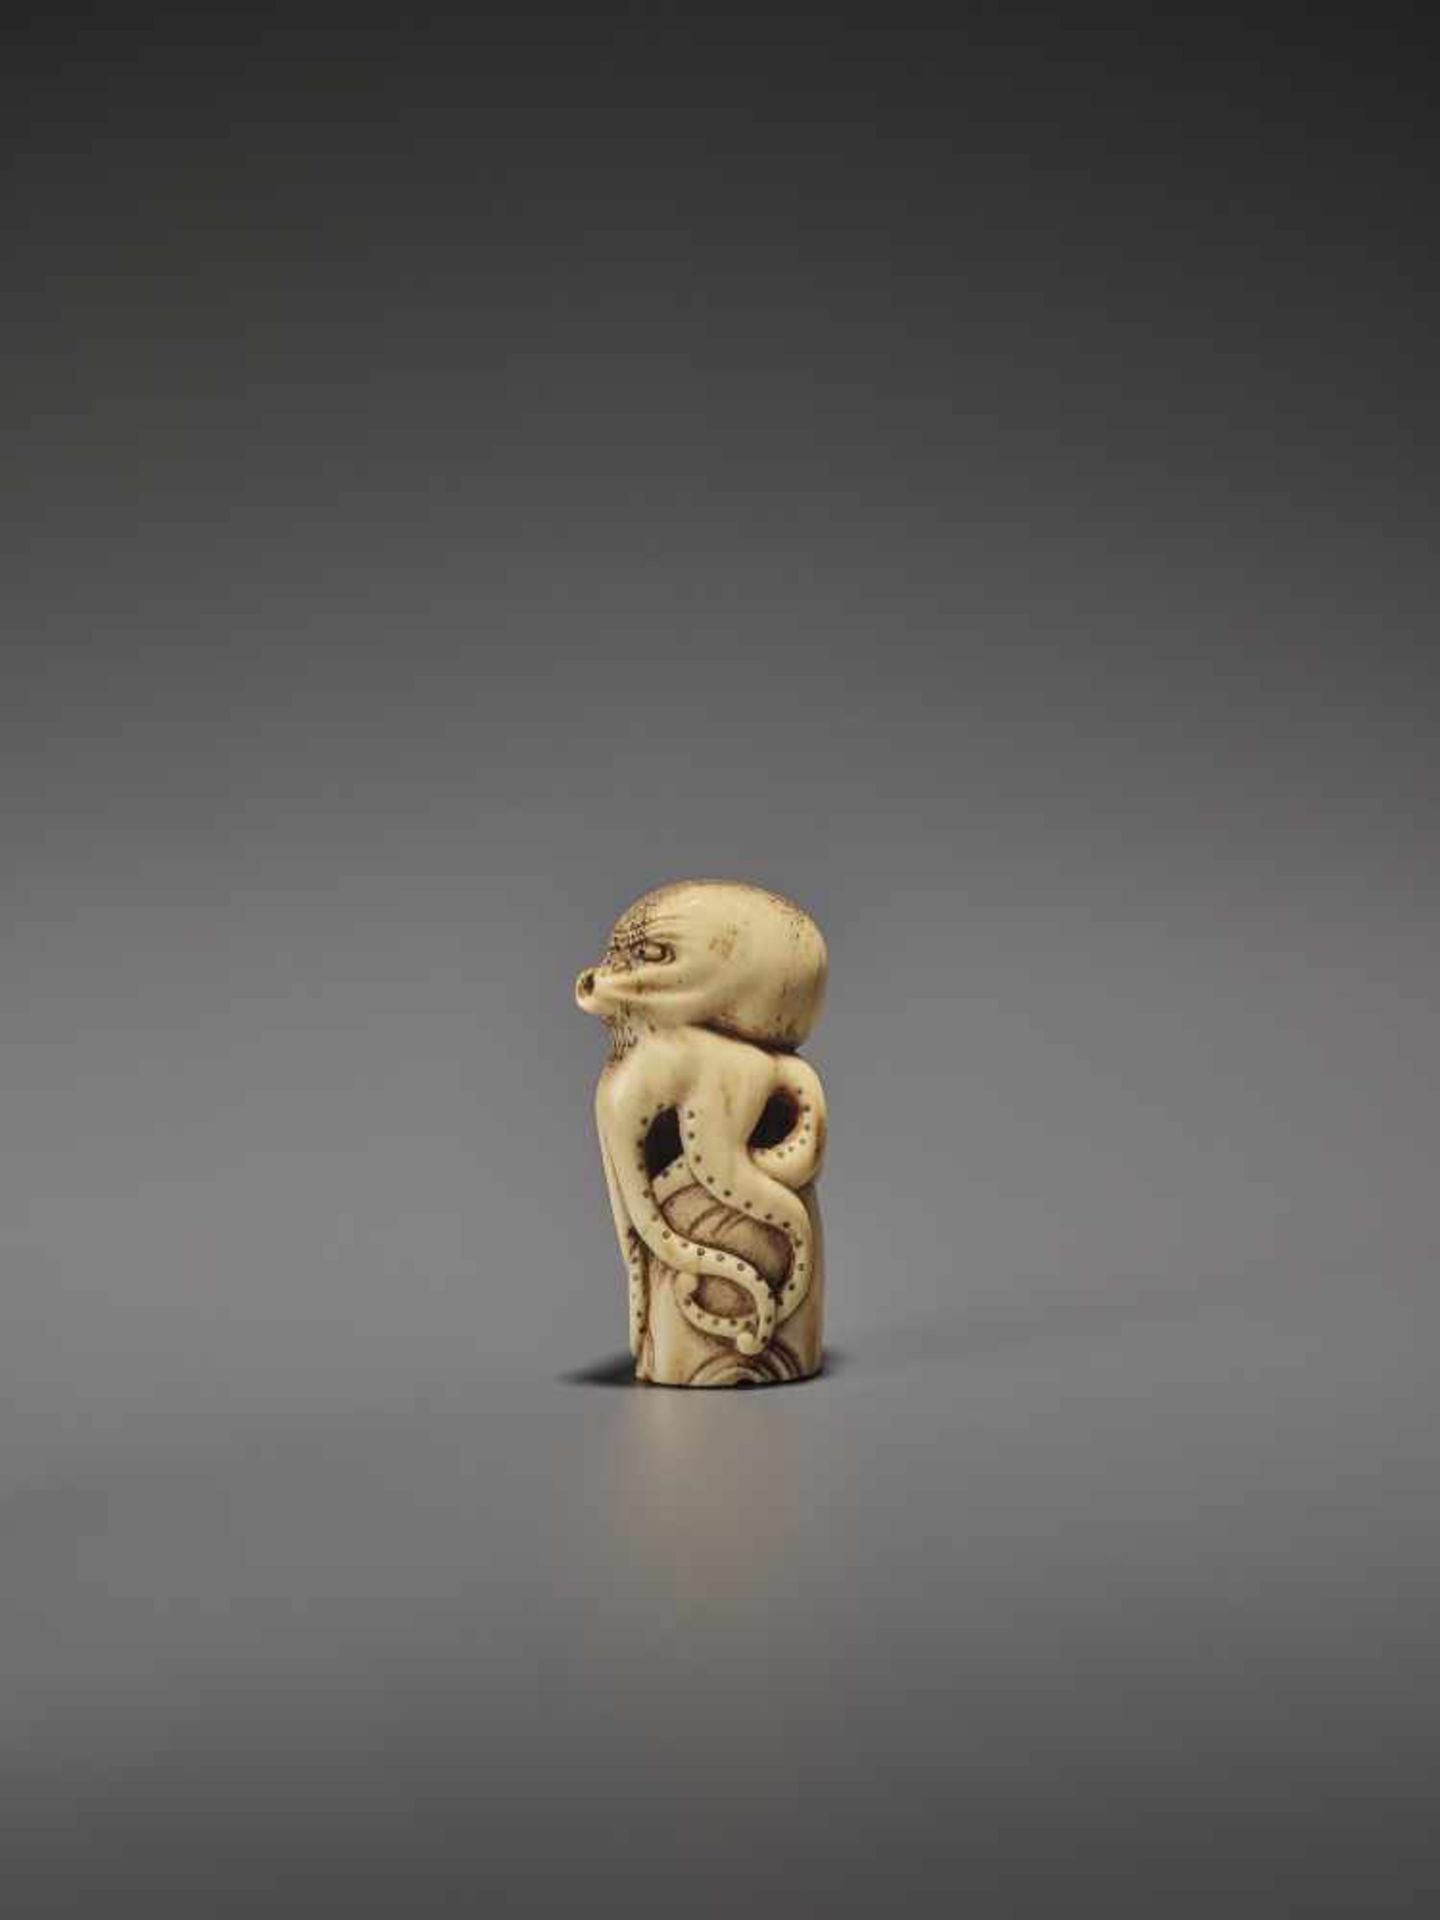 A RARE STAG ANTLER NETSUKE OF AN OCTOPUS UnsignedJapan, early 19th century, Edo period (1615-1868) - Image 4 of 10